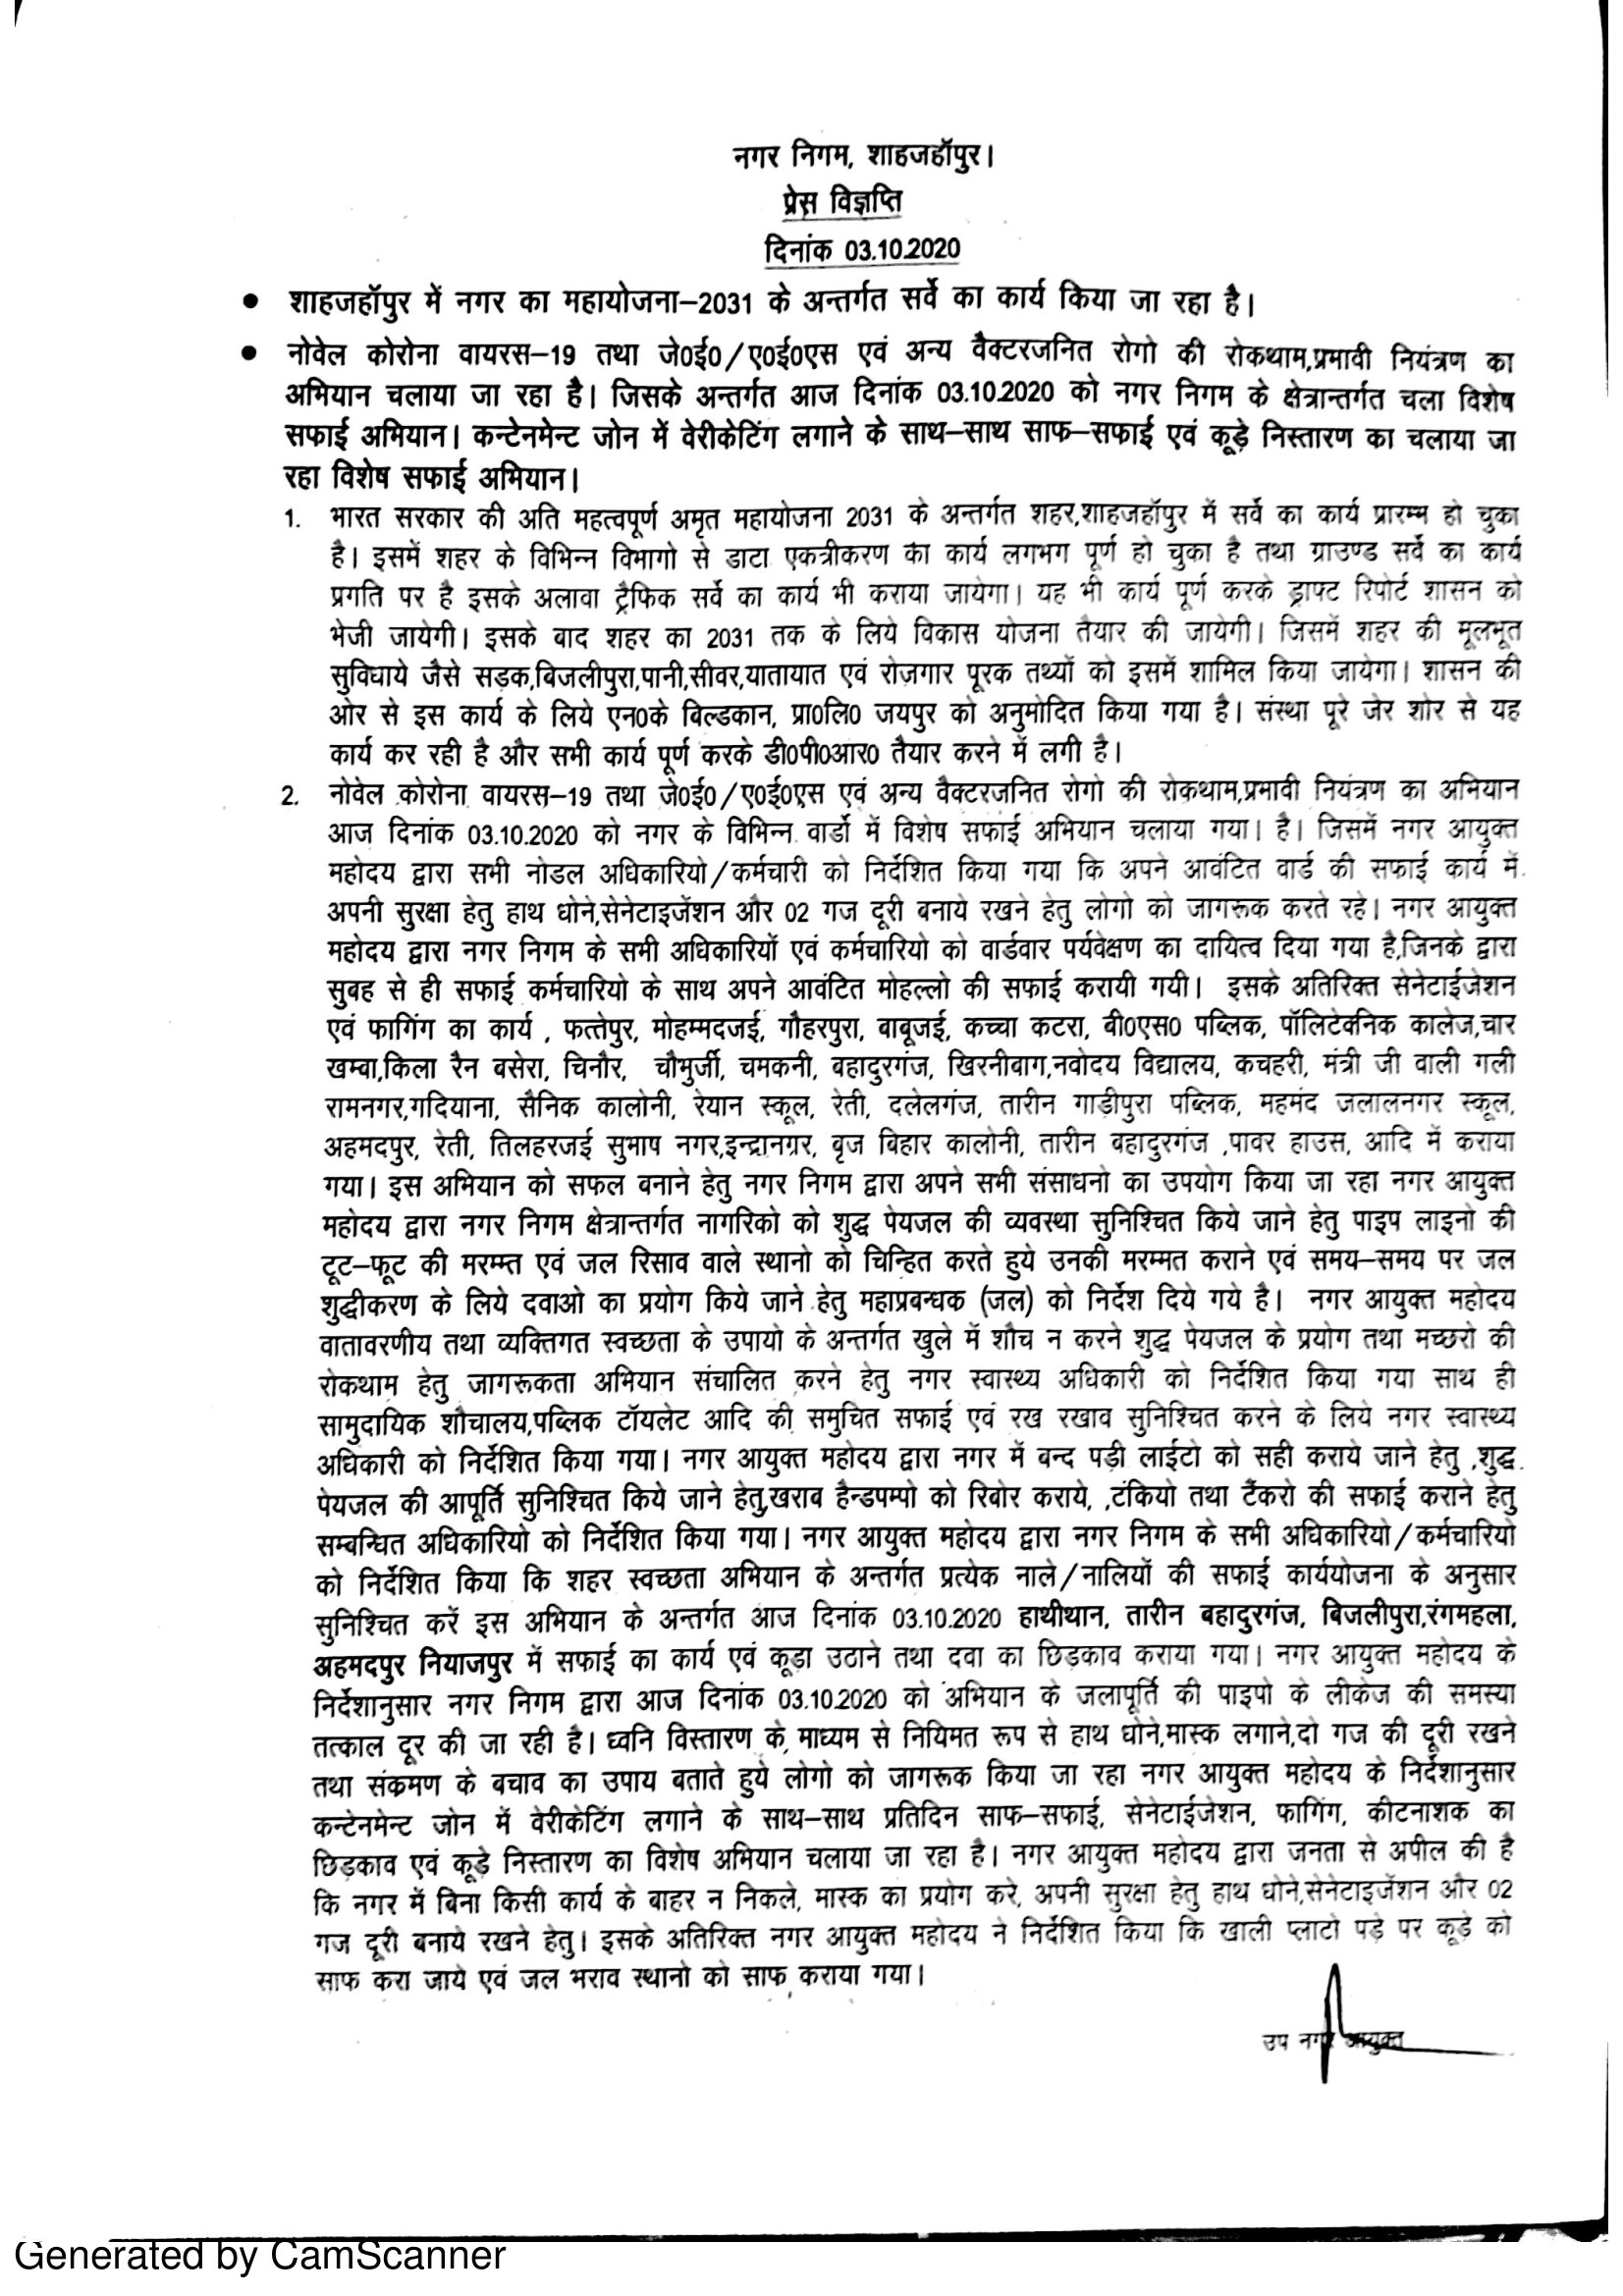 Regarding special cleanliness campaign run on 03/10/2020 in the area of responsibility of Municipal Corporation Shahjahanpur